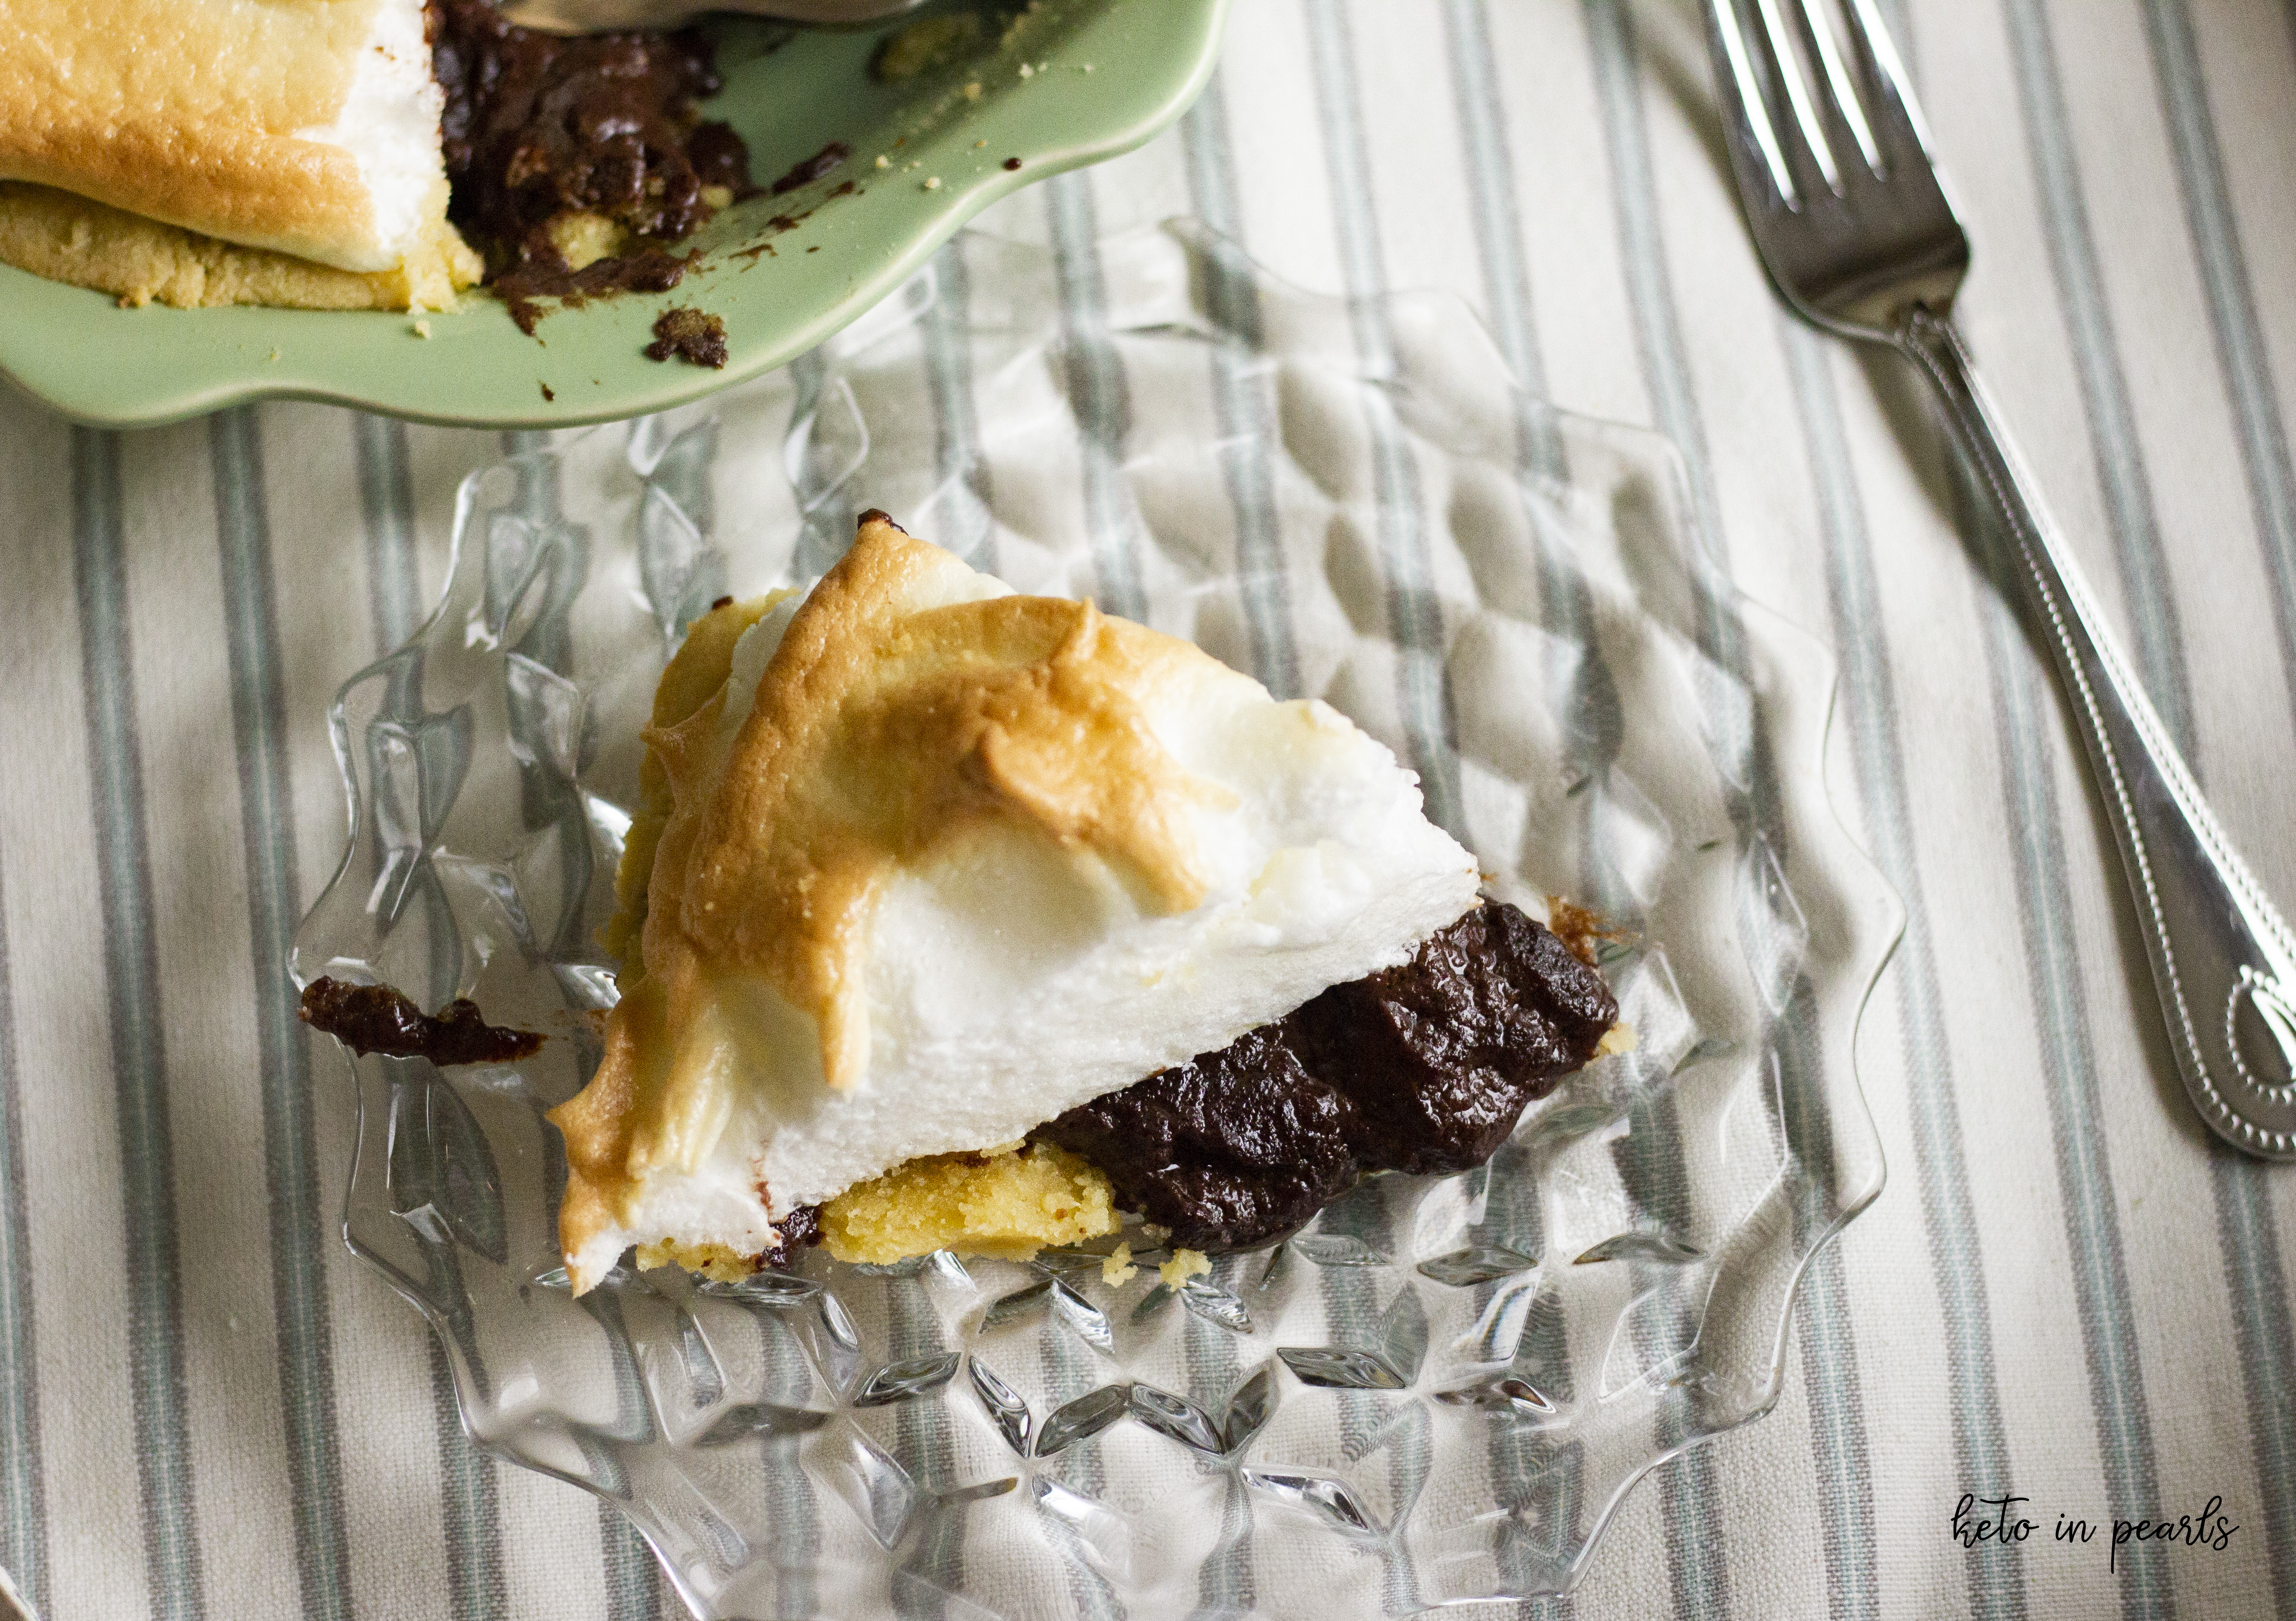 Keto chocolate pie with mile high meringue. Only 3 net carbs per serving and basic ingredients!